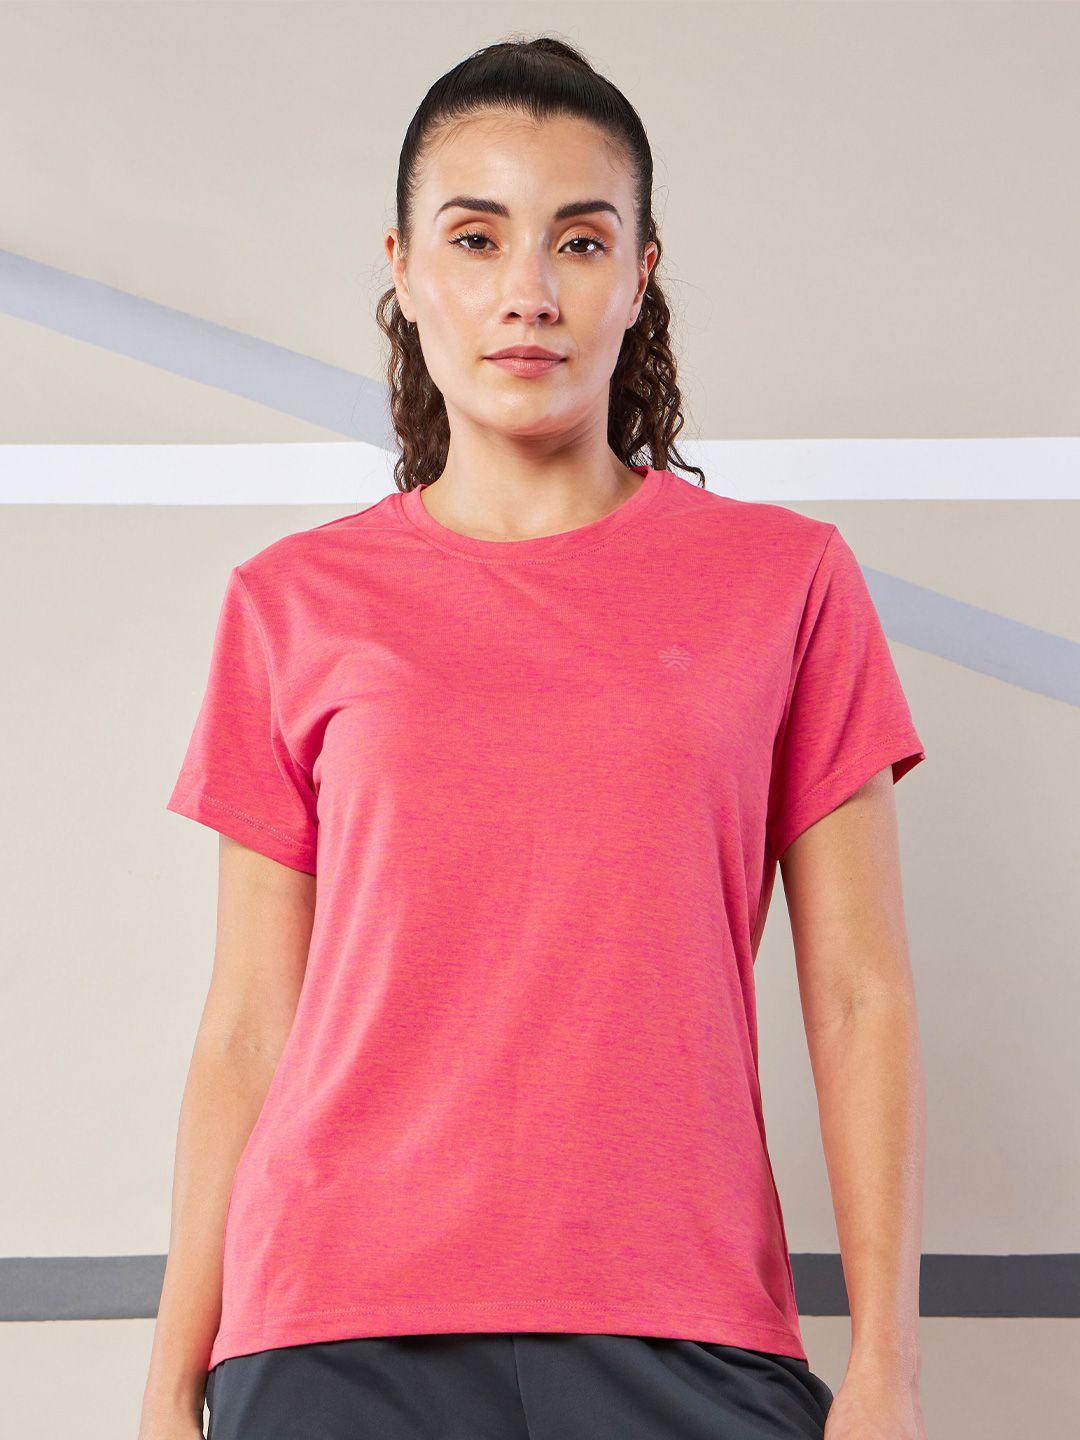 cultsport-train-all-dry-fit-round-neck-sports-t-shirt